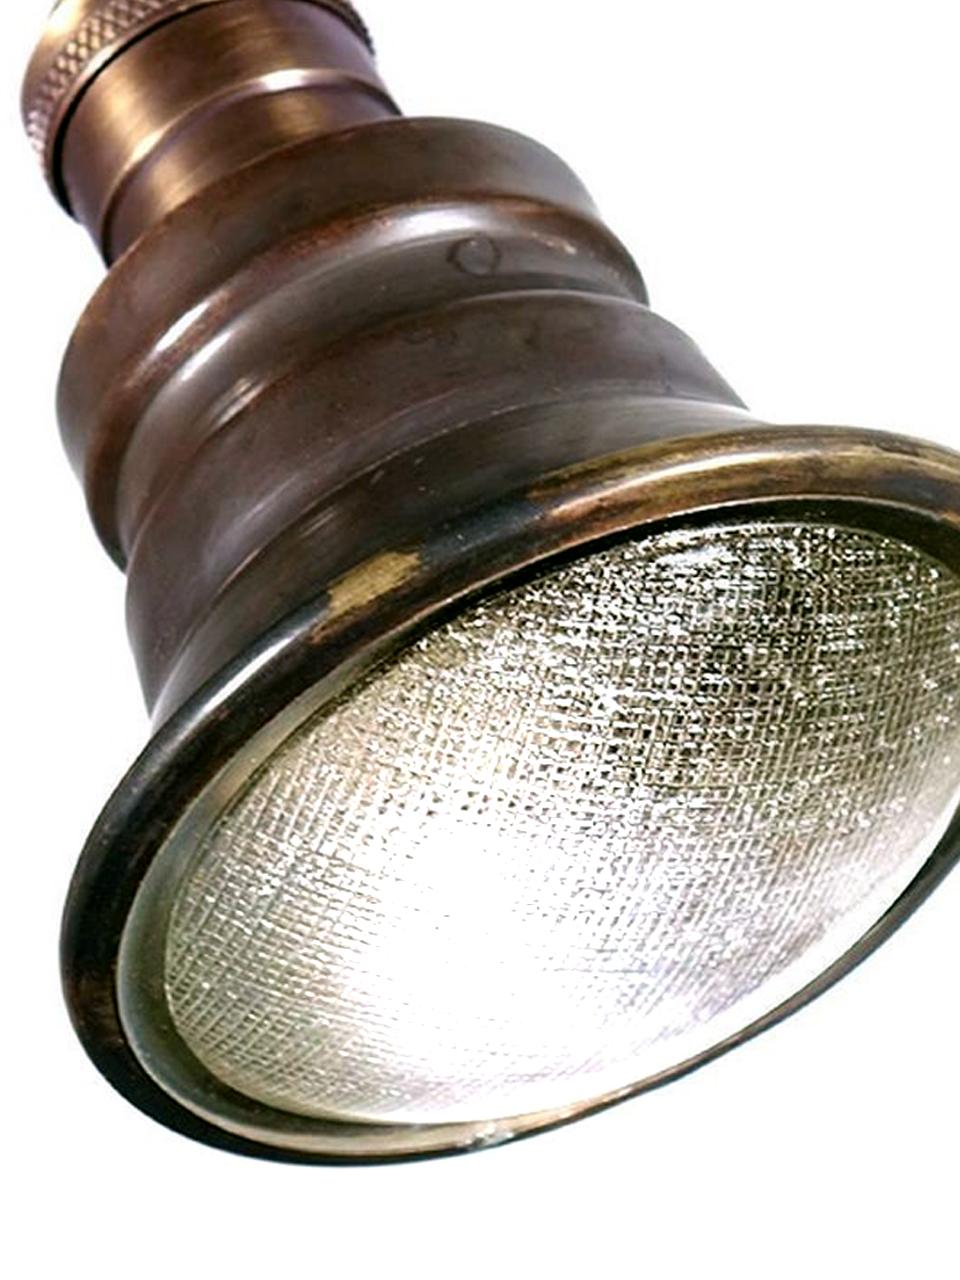 Pictured are mini spot pendants. They come in a dark brass finish. The interiors are silvered and a brass ring holds a textured glass lens. It’s has a 3.75 in. diameter. These lamps work well in numbers, hung as an informal group or in a straight